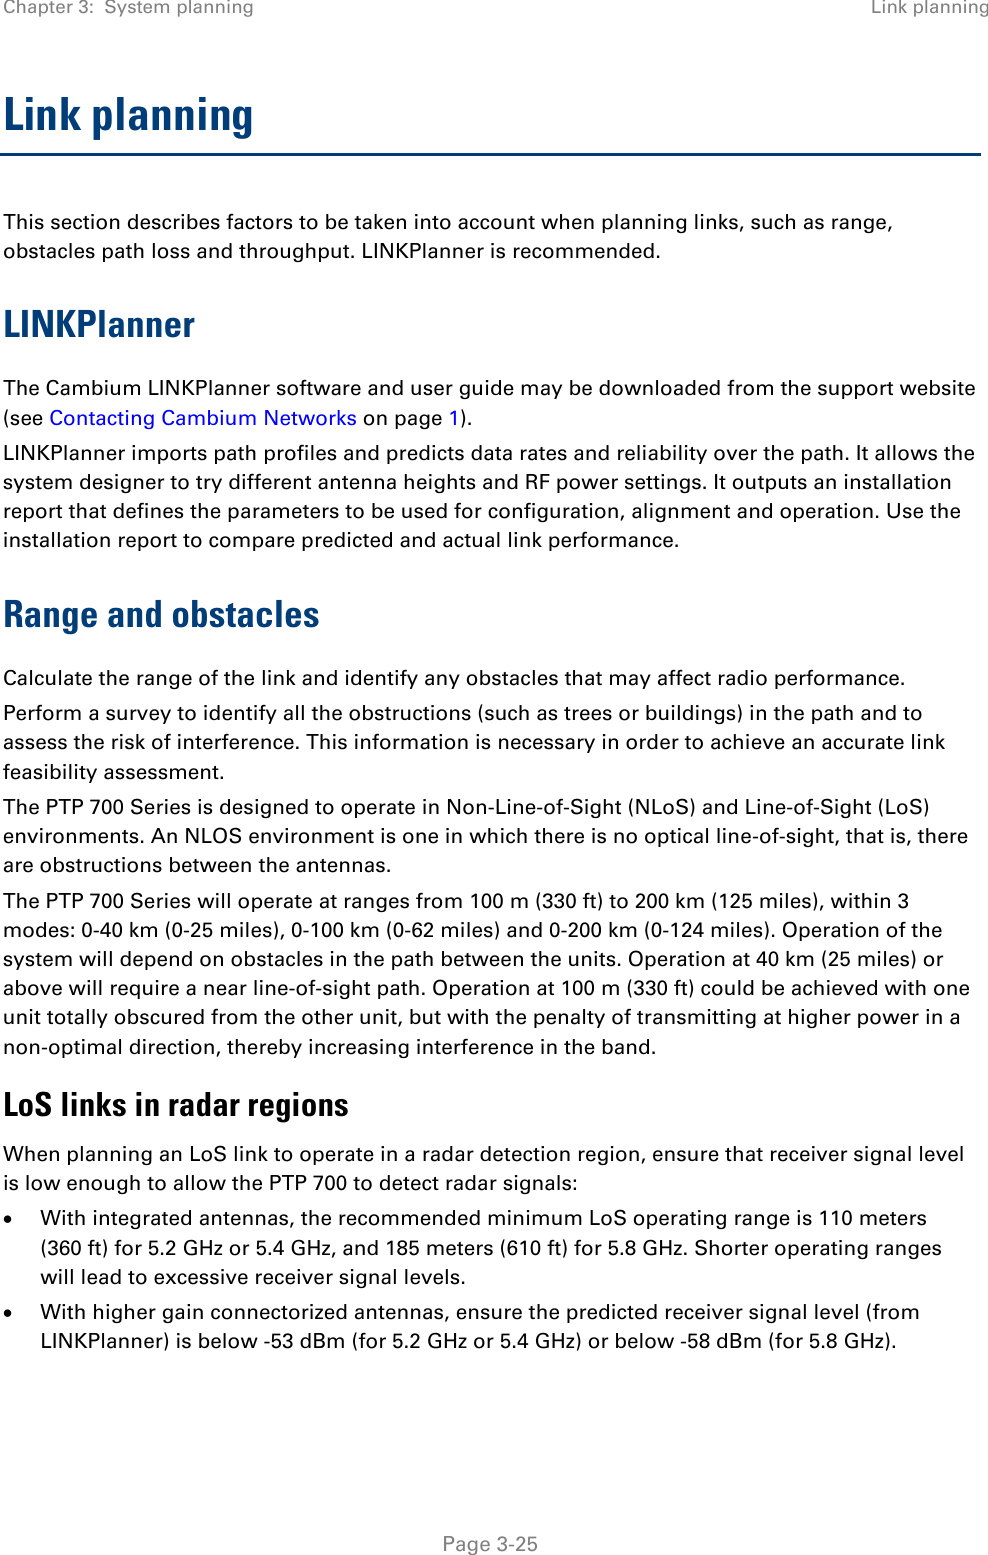 Chapter 3:  System planning Link planning  Link planning This section describes factors to be taken into account when planning links, such as range, obstacles path loss and throughput. LINKPlanner is recommended. LINKPlanner The Cambium LINKPlanner software and user guide may be downloaded from the support website (see Contacting Cambium Networks on page 1). LINKPlanner imports path profiles and predicts data rates and reliability over the path. It allows the system designer to try different antenna heights and RF power settings. It outputs an installation report that defines the parameters to be used for configuration, alignment and operation. Use the installation report to compare predicted and actual link performance. Range and obstacles Calculate the range of the link and identify any obstacles that may affect radio performance. Perform a survey to identify all the obstructions (such as trees or buildings) in the path and to assess the risk of interference. This information is necessary in order to achieve an accurate link feasibility assessment. The PTP 700 Series is designed to operate in Non-Line-of-Sight (NLoS) and Line-of-Sight (LoS) environments. An NLOS environment is one in which there is no optical line-of-sight, that is, there are obstructions between the antennas. The PTP 700 Series will operate at ranges from 100 m (330 ft) to 200 km (125 miles), within 3 modes: 0-40 km (0-25 miles), 0-100 km (0-62 miles) and 0-200 km (0-124 miles). Operation of the system will depend on obstacles in the path between the units. Operation at 40 km (25 miles) or above will require a near line-of-sight path. Operation at 100 m (330 ft) could be achieved with one unit totally obscured from the other unit, but with the penalty of transmitting at higher power in a non-optimal direction, thereby increasing interference in the band. LoS links in radar regions When planning an LoS link to operate in a radar detection region, ensure that receiver signal level is low enough to allow the PTP 700 to detect radar signals: • With integrated antennas, the recommended minimum LoS operating range is 110 meters (360 ft) for 5.2 GHz or 5.4 GHz, and 185 meters (610 ft) for 5.8 GHz. Shorter operating ranges will lead to excessive receiver signal levels. • With higher gain connectorized antennas, ensure the predicted receiver signal level (from LINKPlanner) is below -53 dBm (for 5.2 GHz or 5.4 GHz) or below -58 dBm (for 5.8 GHz).  Page 3-25 